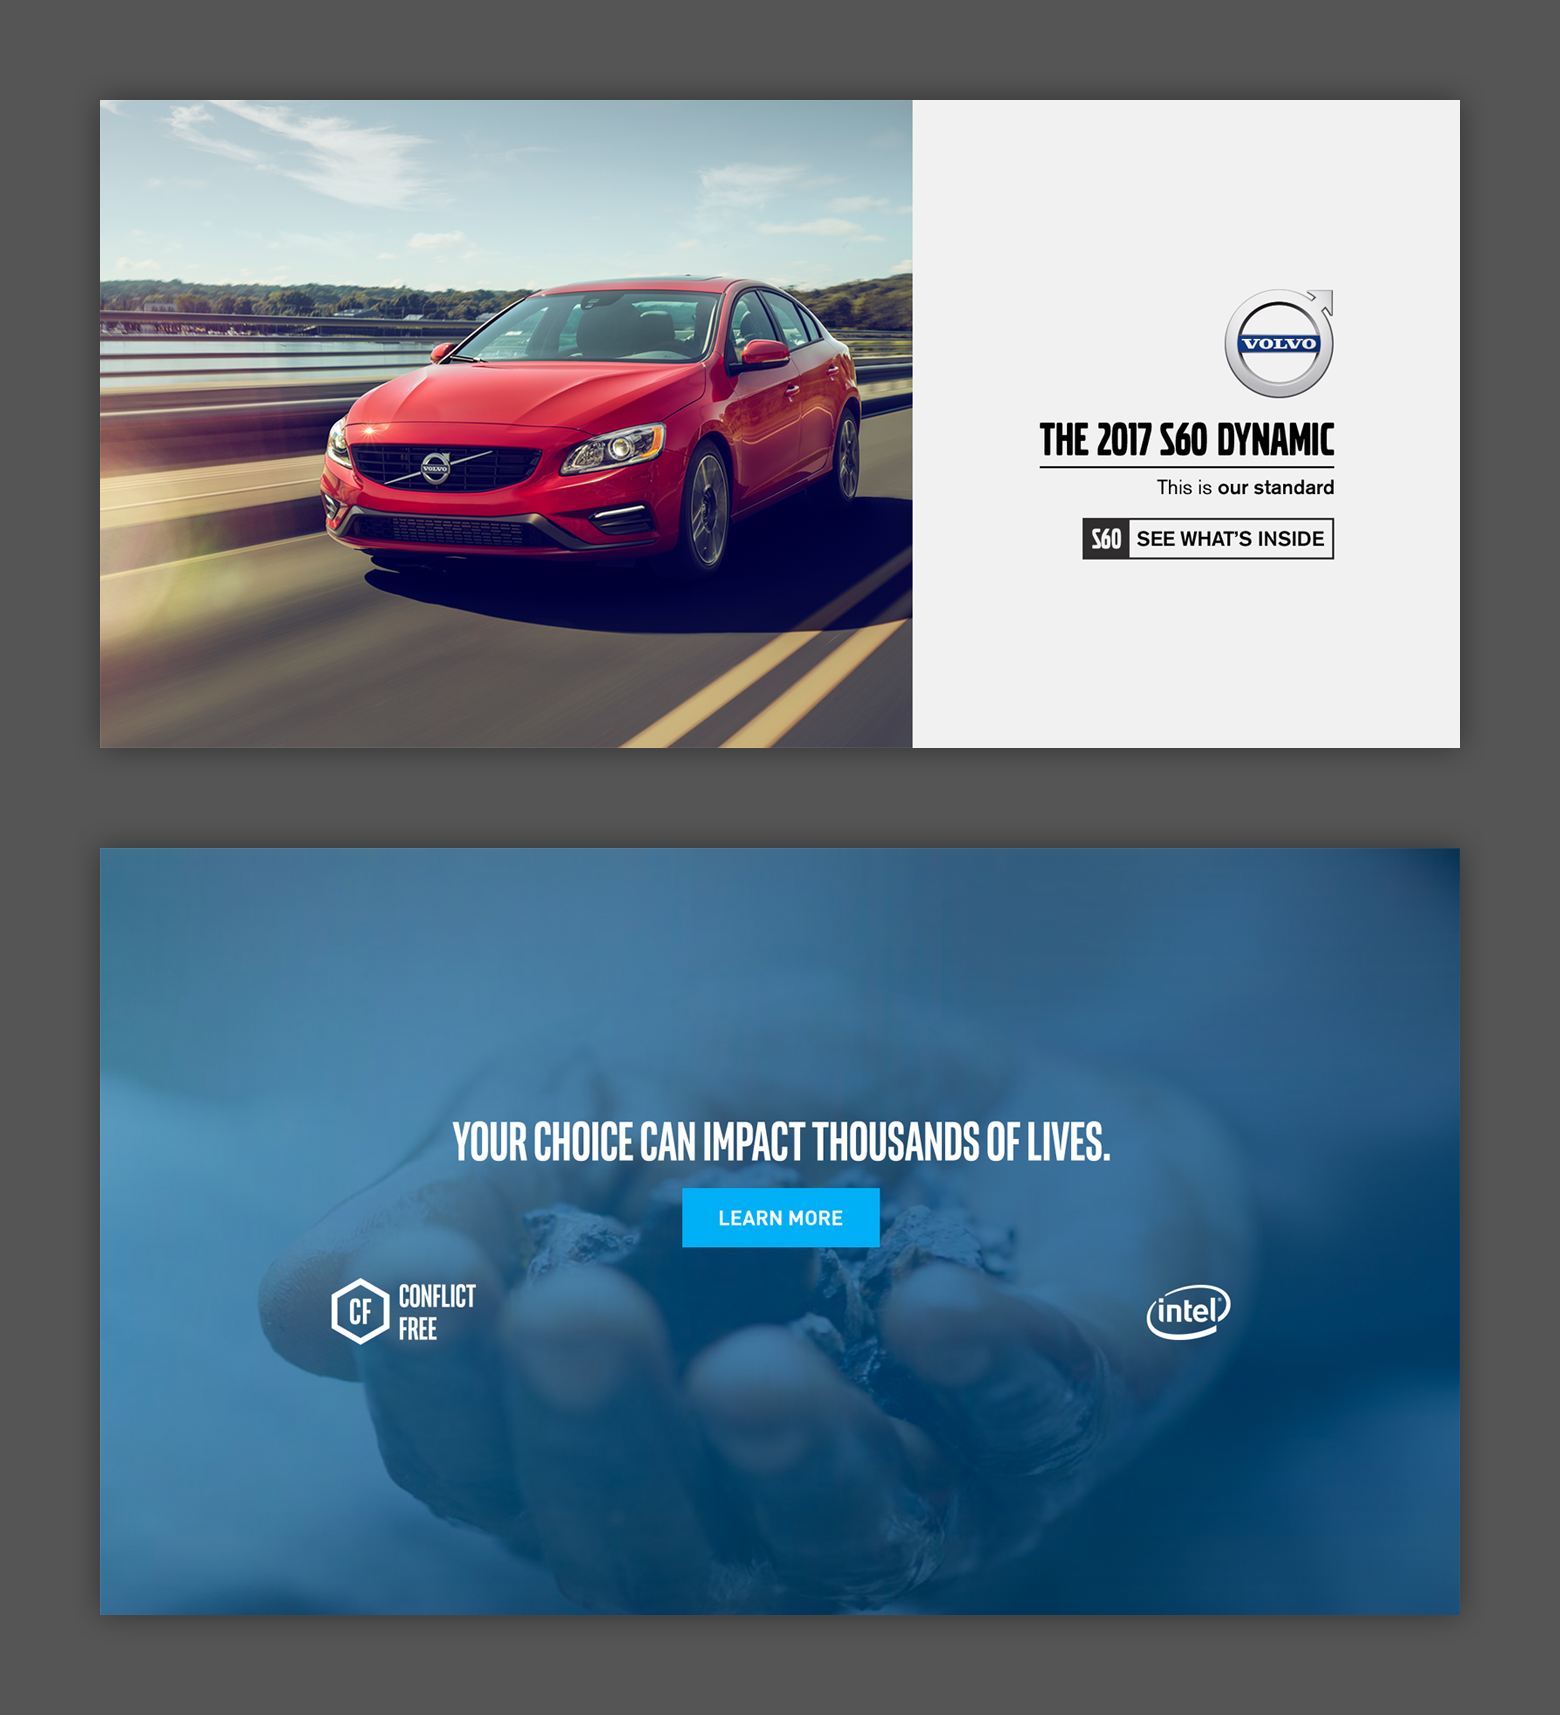 Volvo ad depicting a vehicle and an Intel ad depicting a hand holding rocks